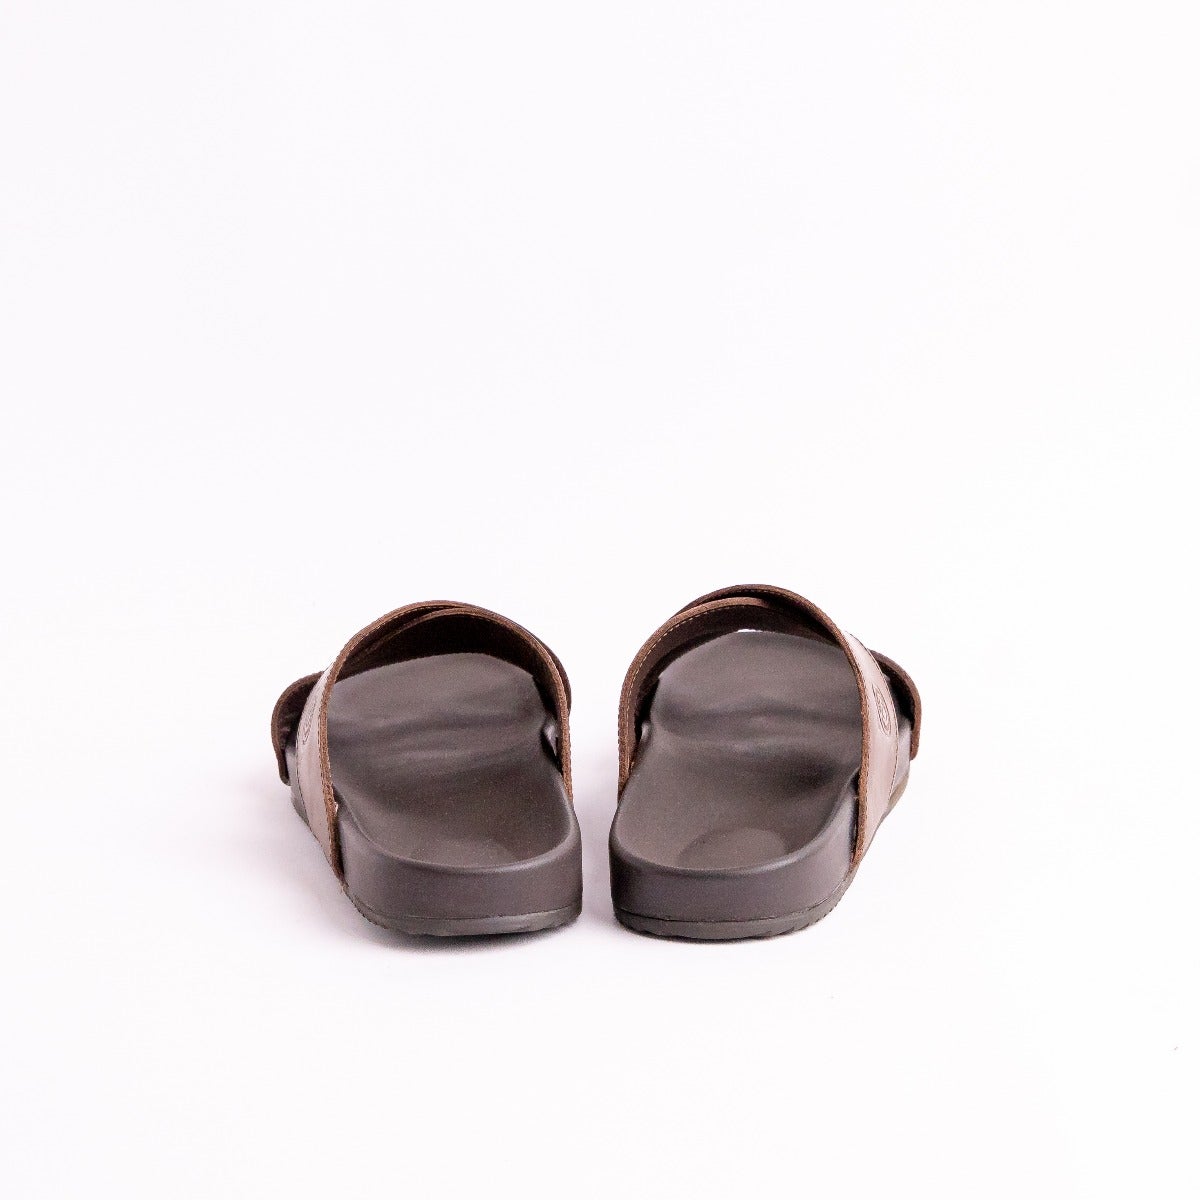 Taos PERFECT Espresso Leather Sandals - Family Footwear Center